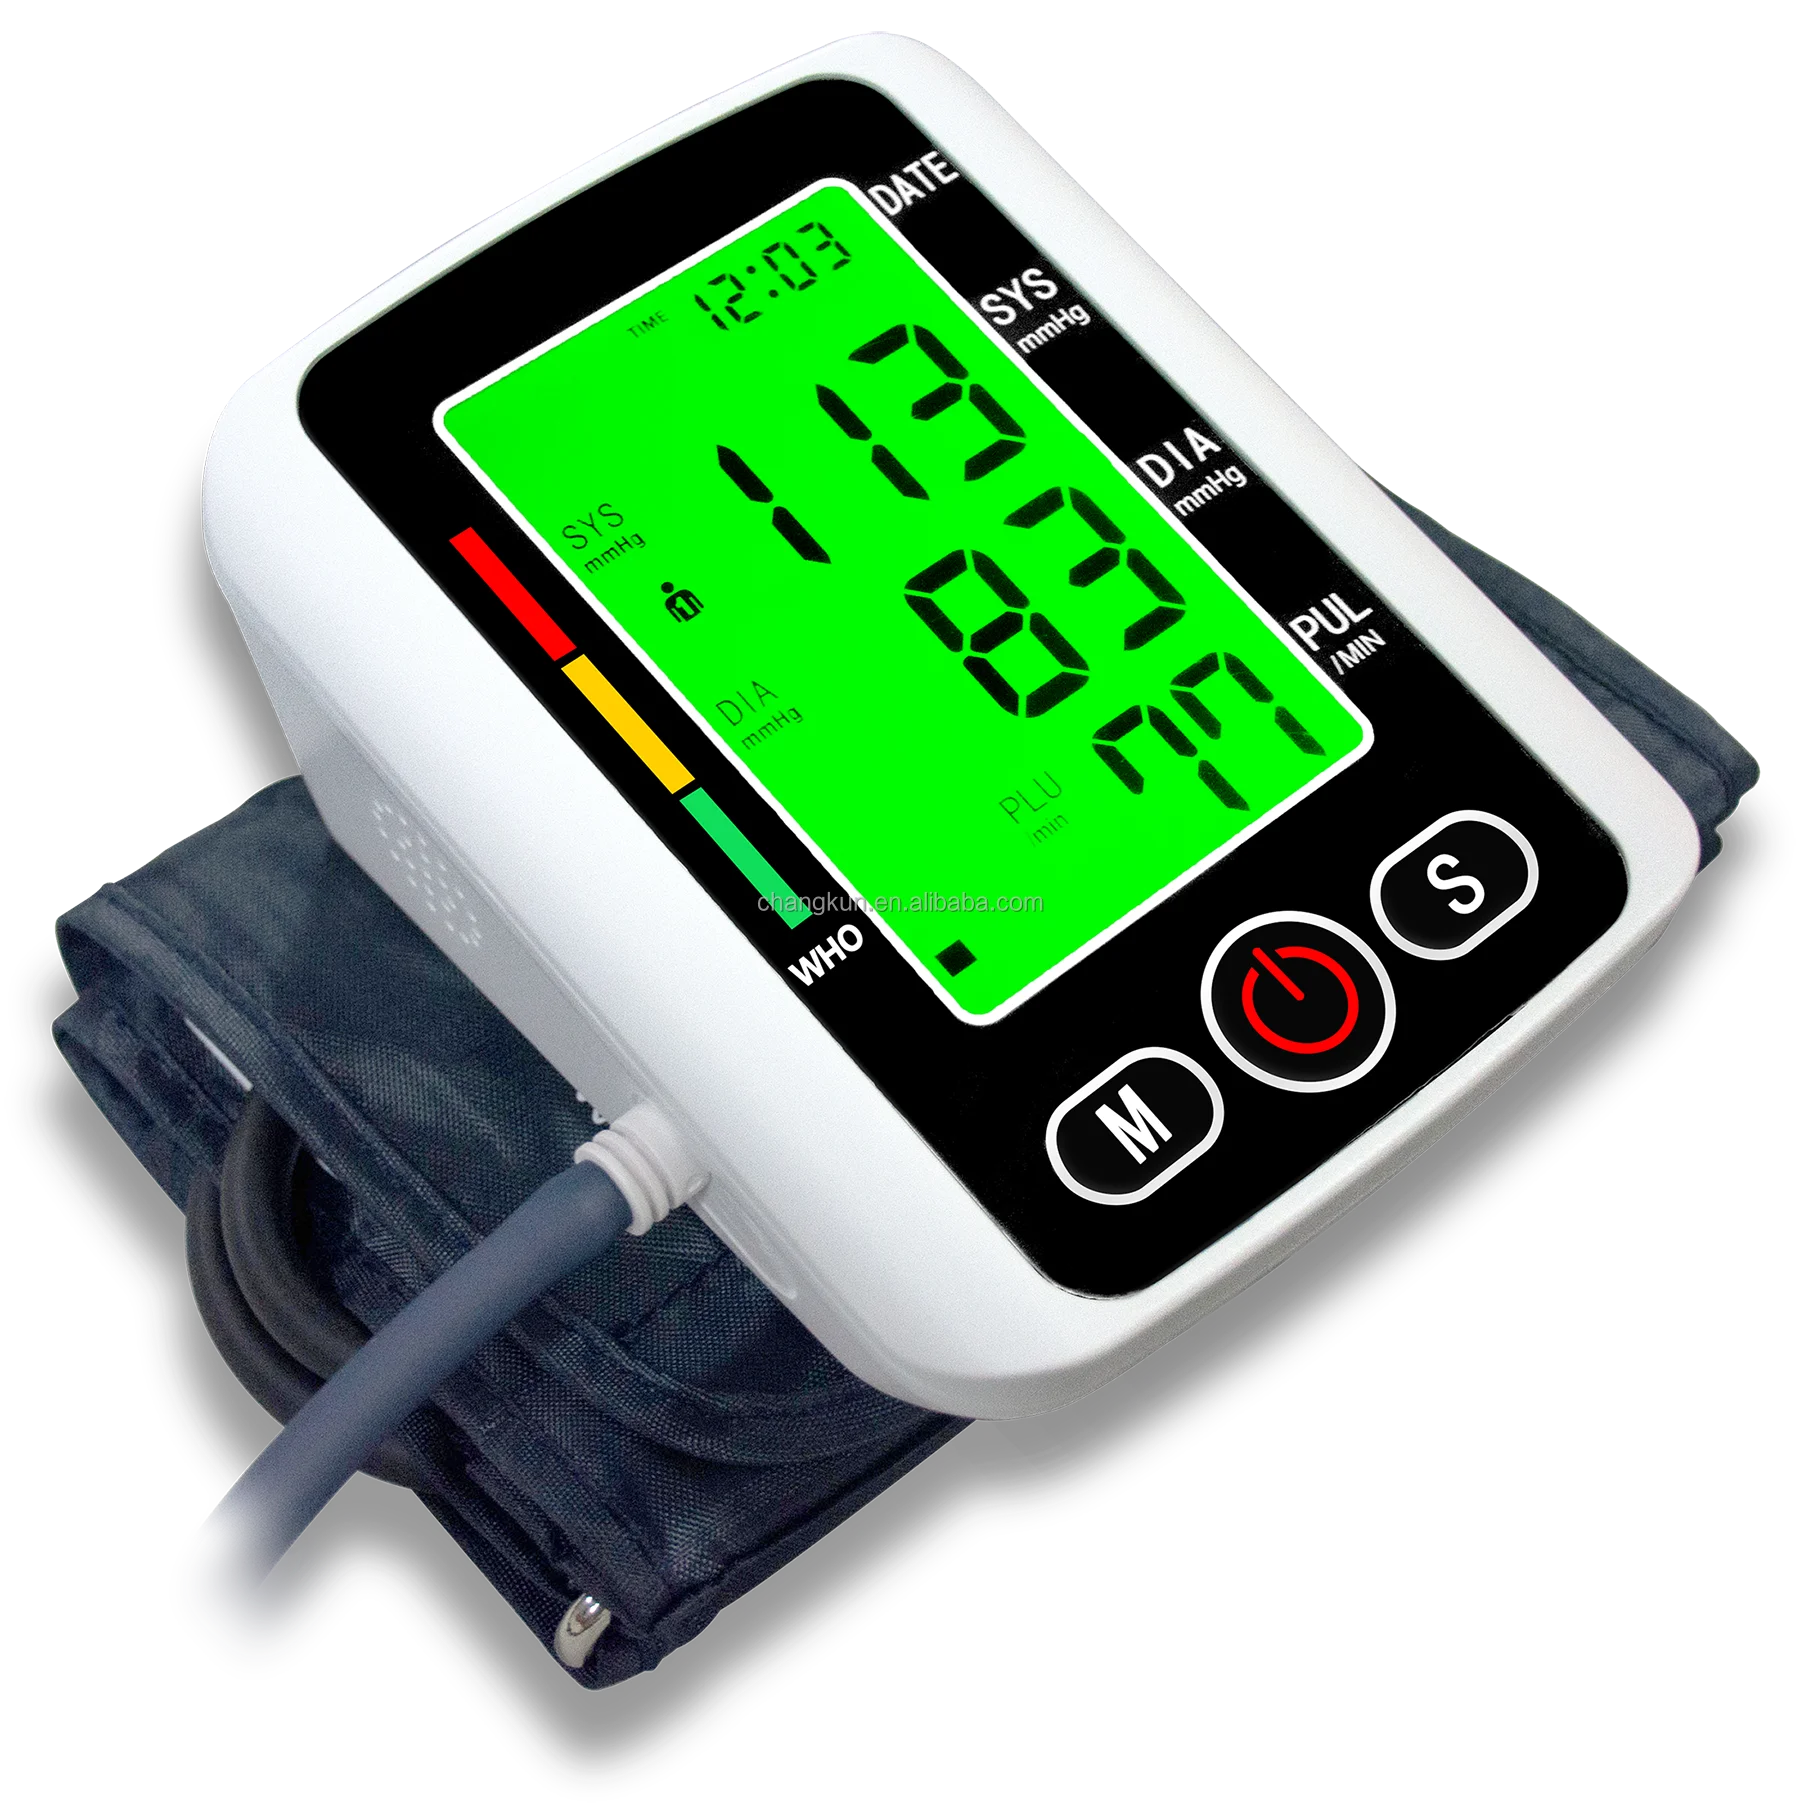 

Fully Automatic Upper Arm Blood Pressure Monitor Tensiometro De Brazo Tensiometer Digital Hot Sell In South America